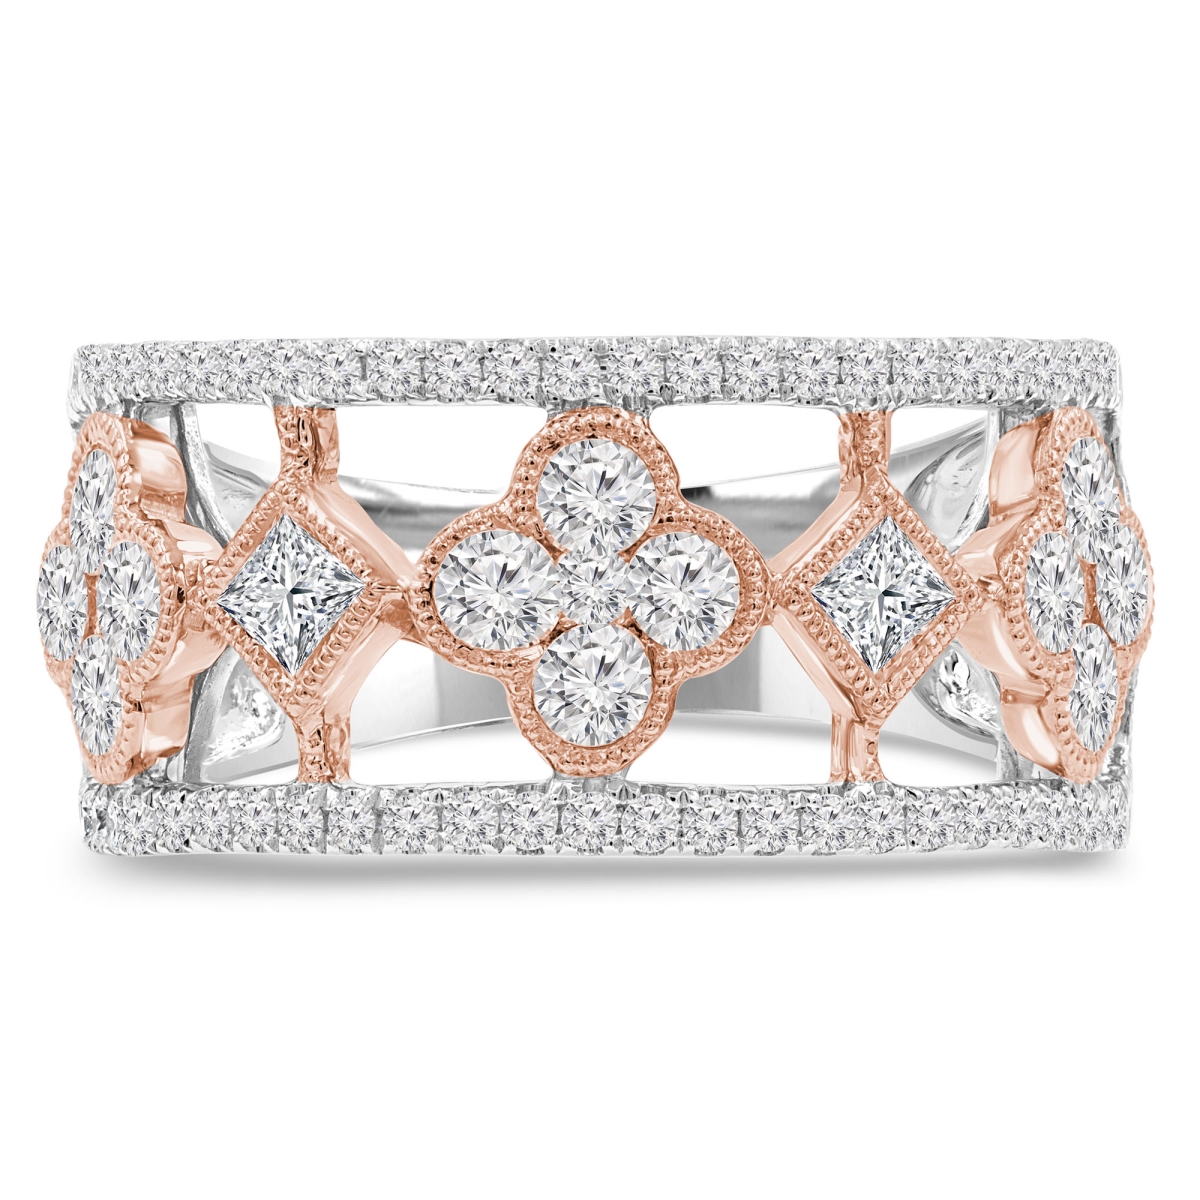 Picture of Majesty Diamonds MDR210138-P 1.13 CTW Princess Diamond Cocktail Ring in 14K Two-Tone Gold